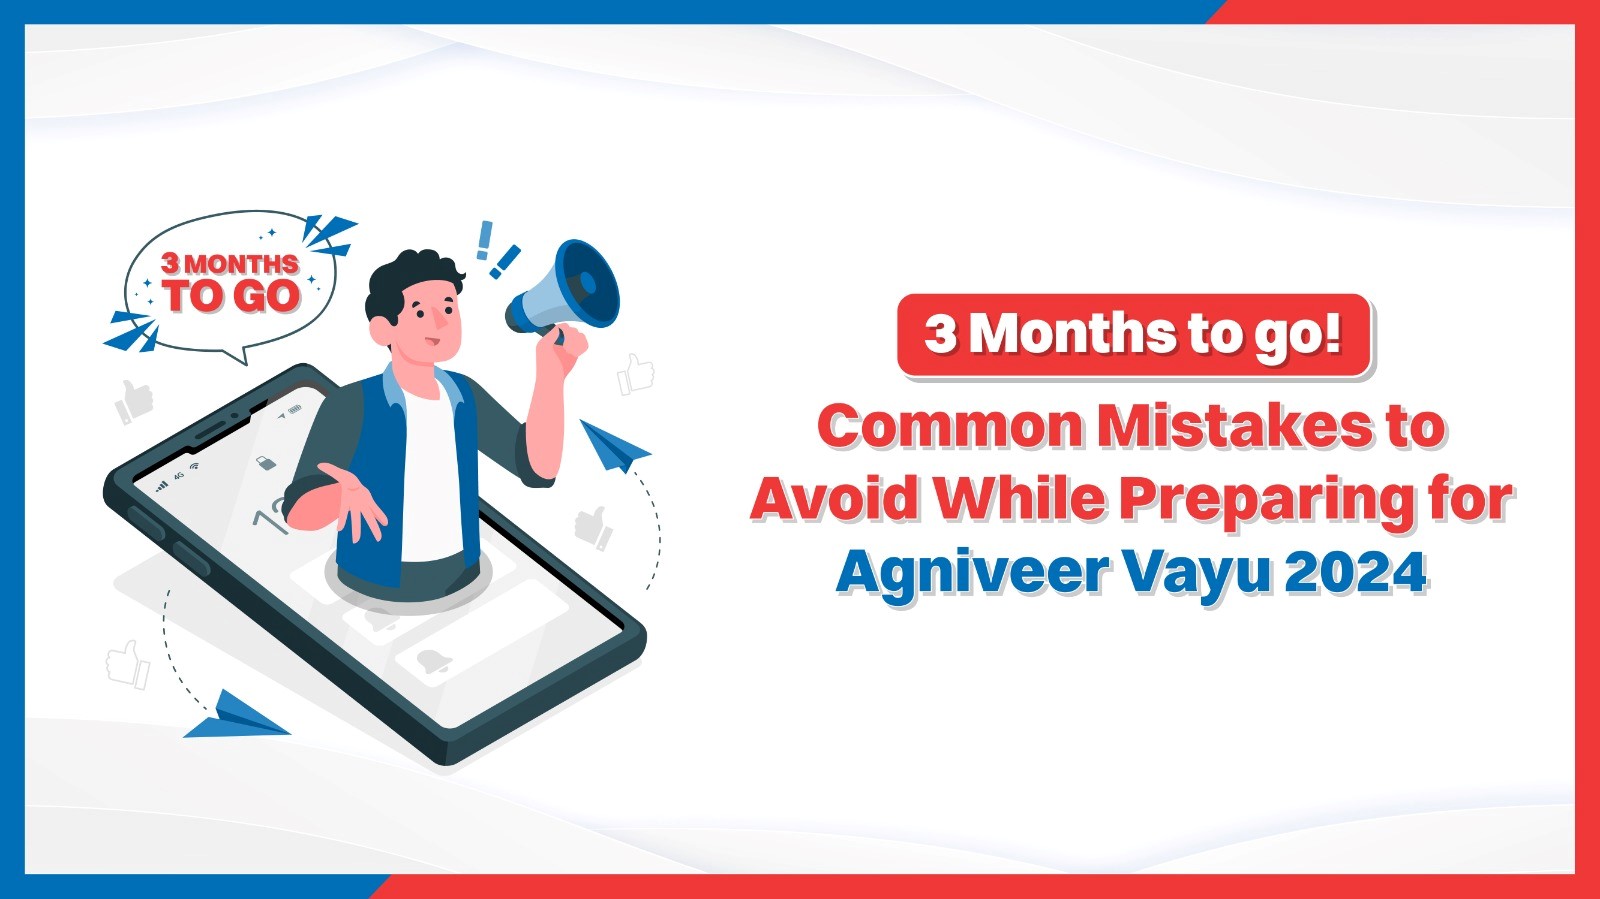 3 Months to go! Common Mistakes to Avoid While Preparing for Agniveer Vayu 2024.jpg